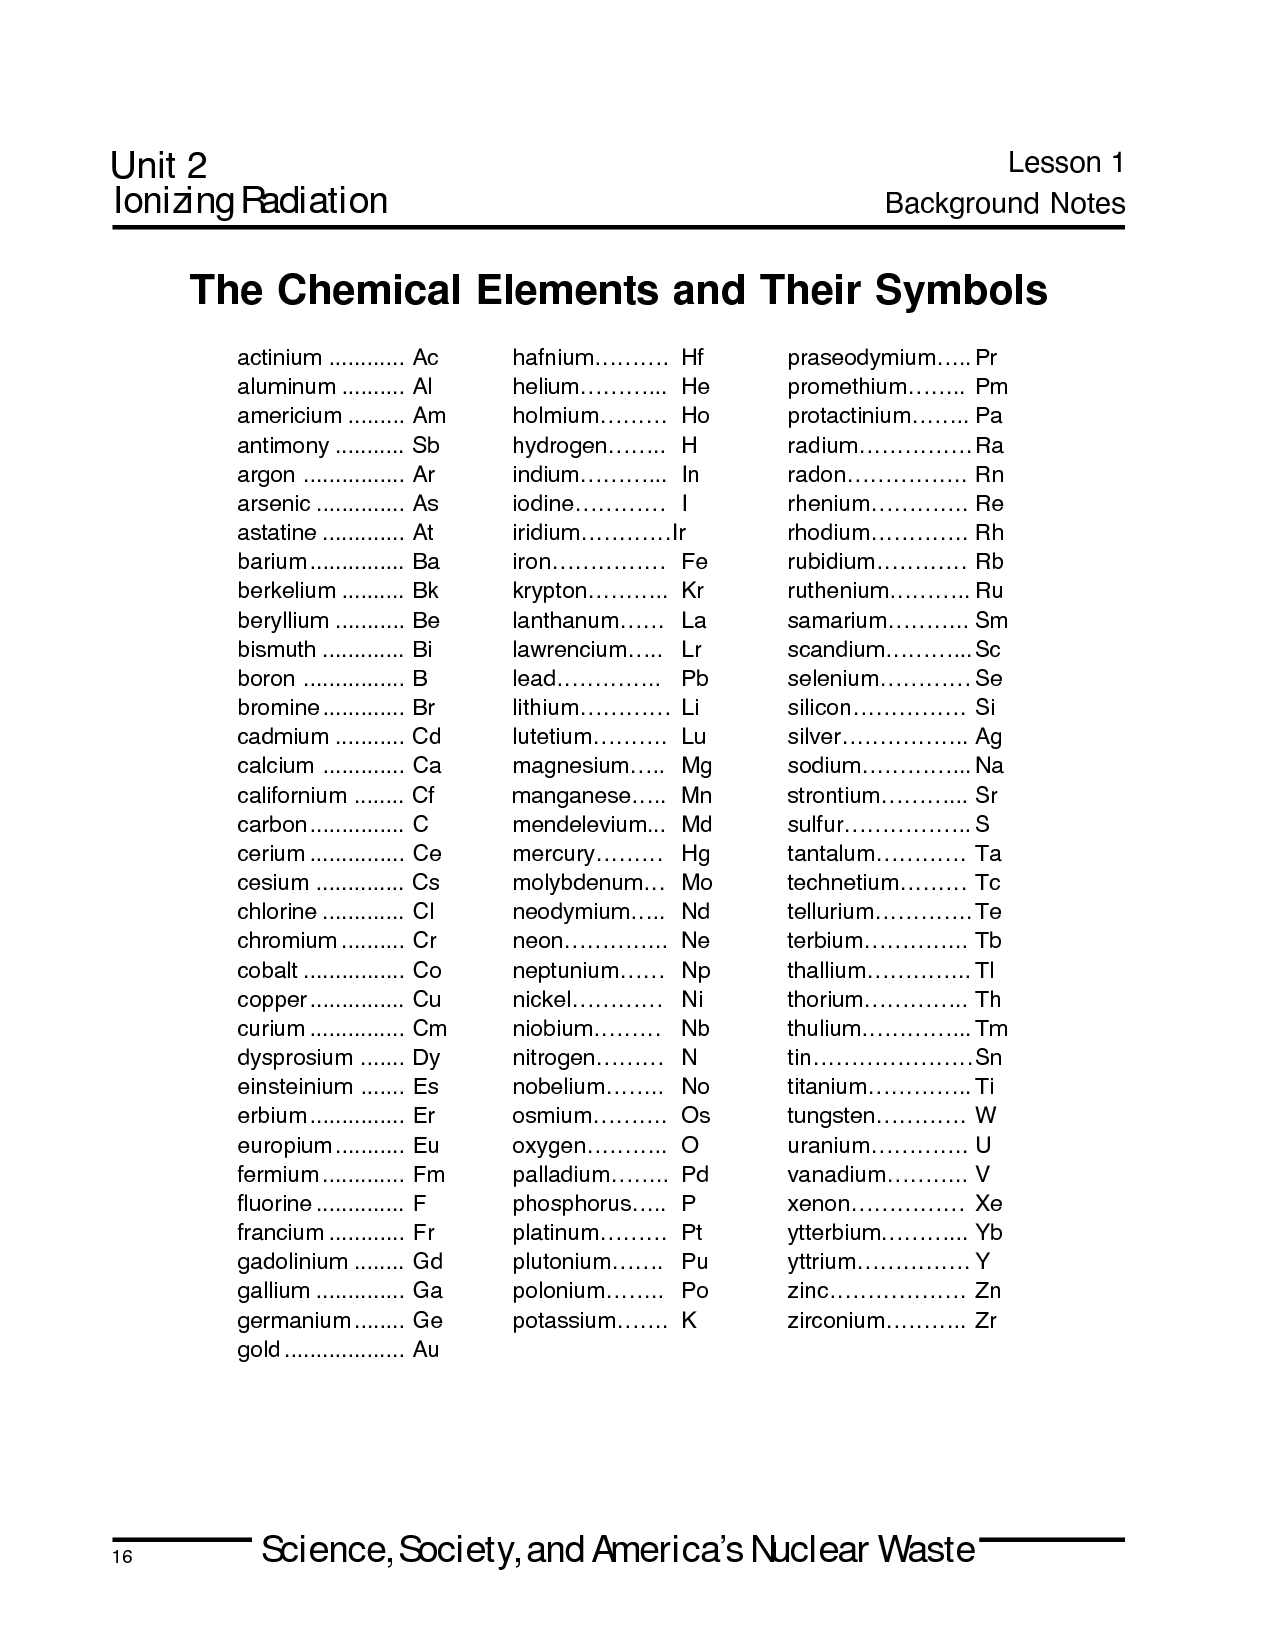 Chemical Elements and Their Symbols Image